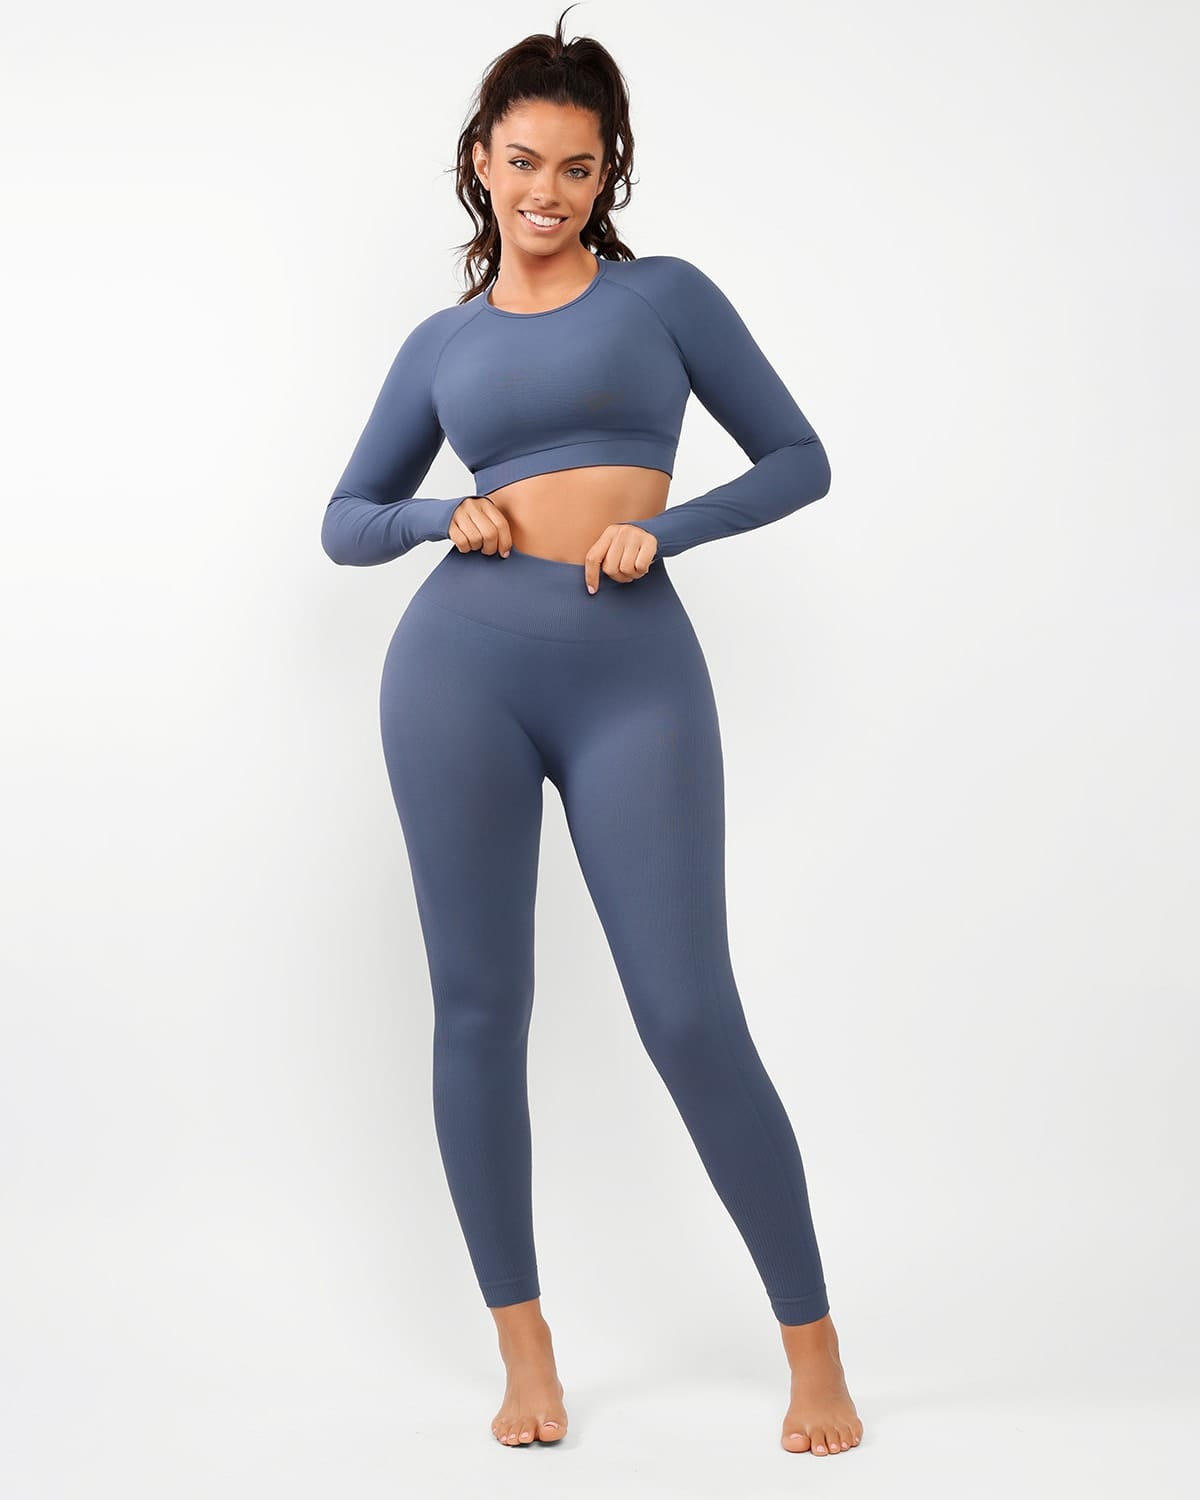 Women's Activewear Suitable for Low-intensity Exercise